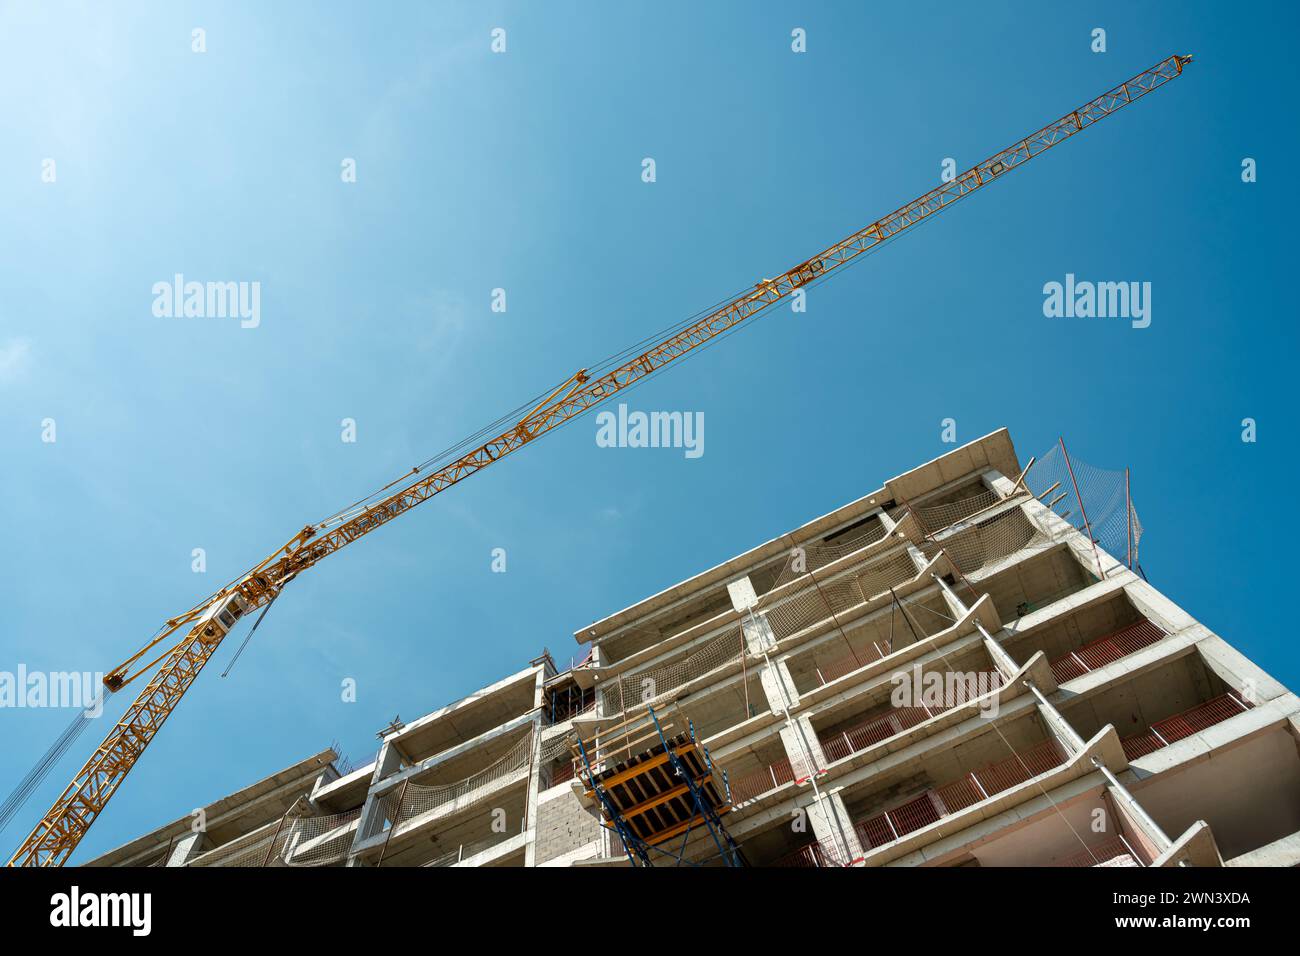 Construction crane working on large construction site Stock Photo